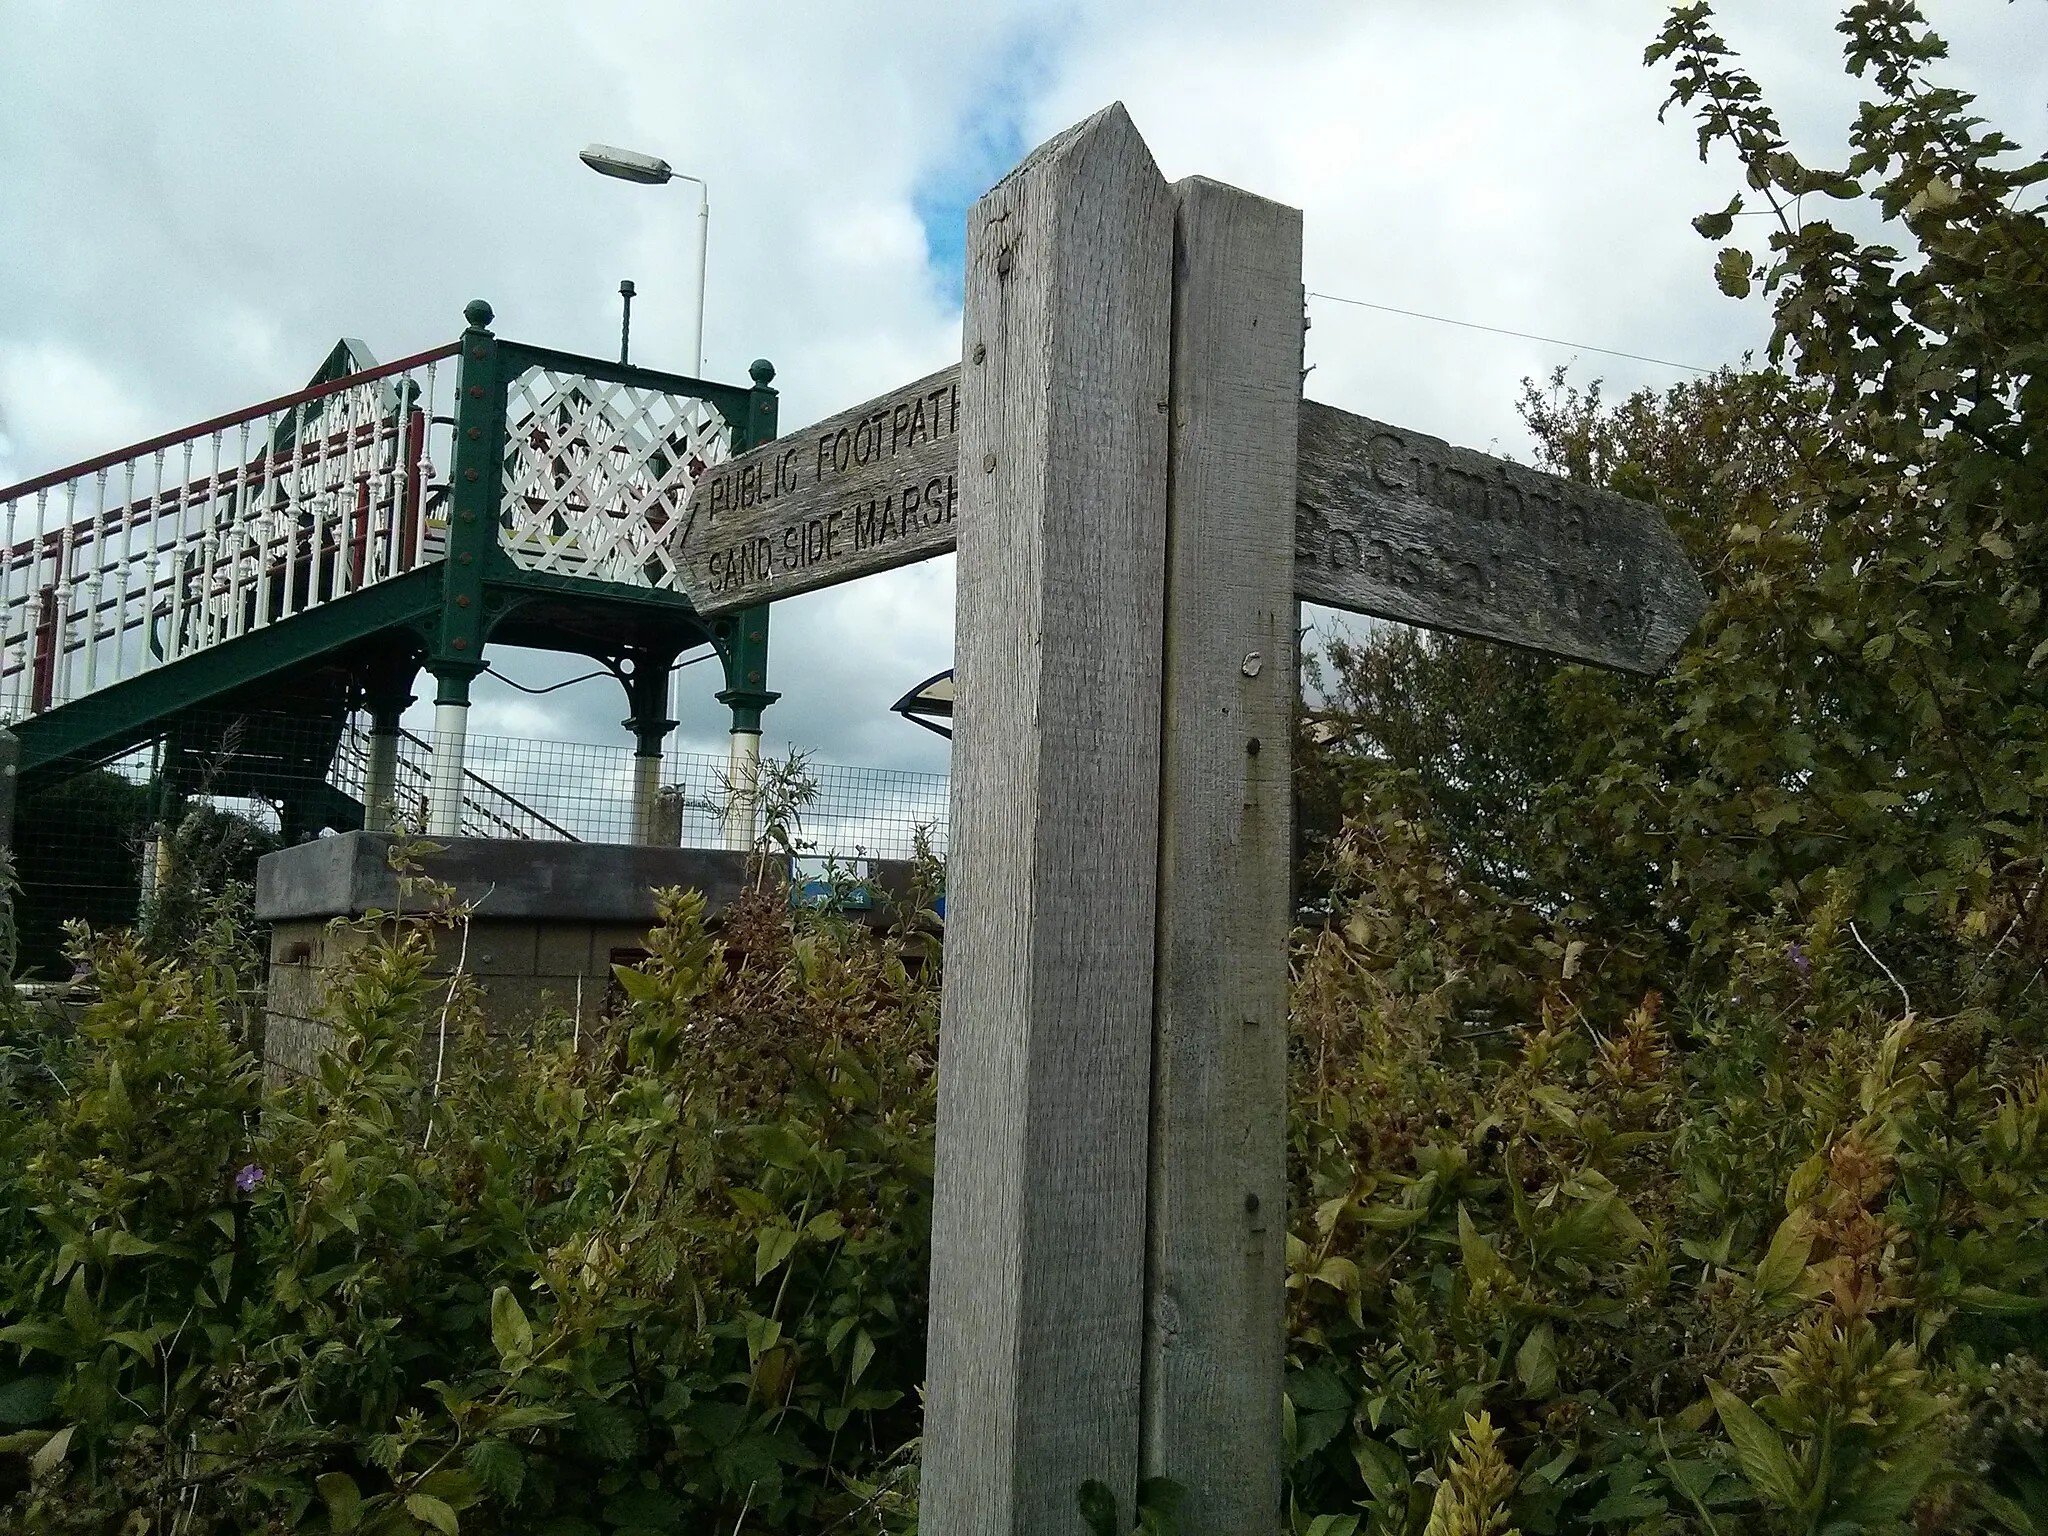 Photo showing: Cumbria coastal path and sand side marsh path at Kirkby in Furness railway station